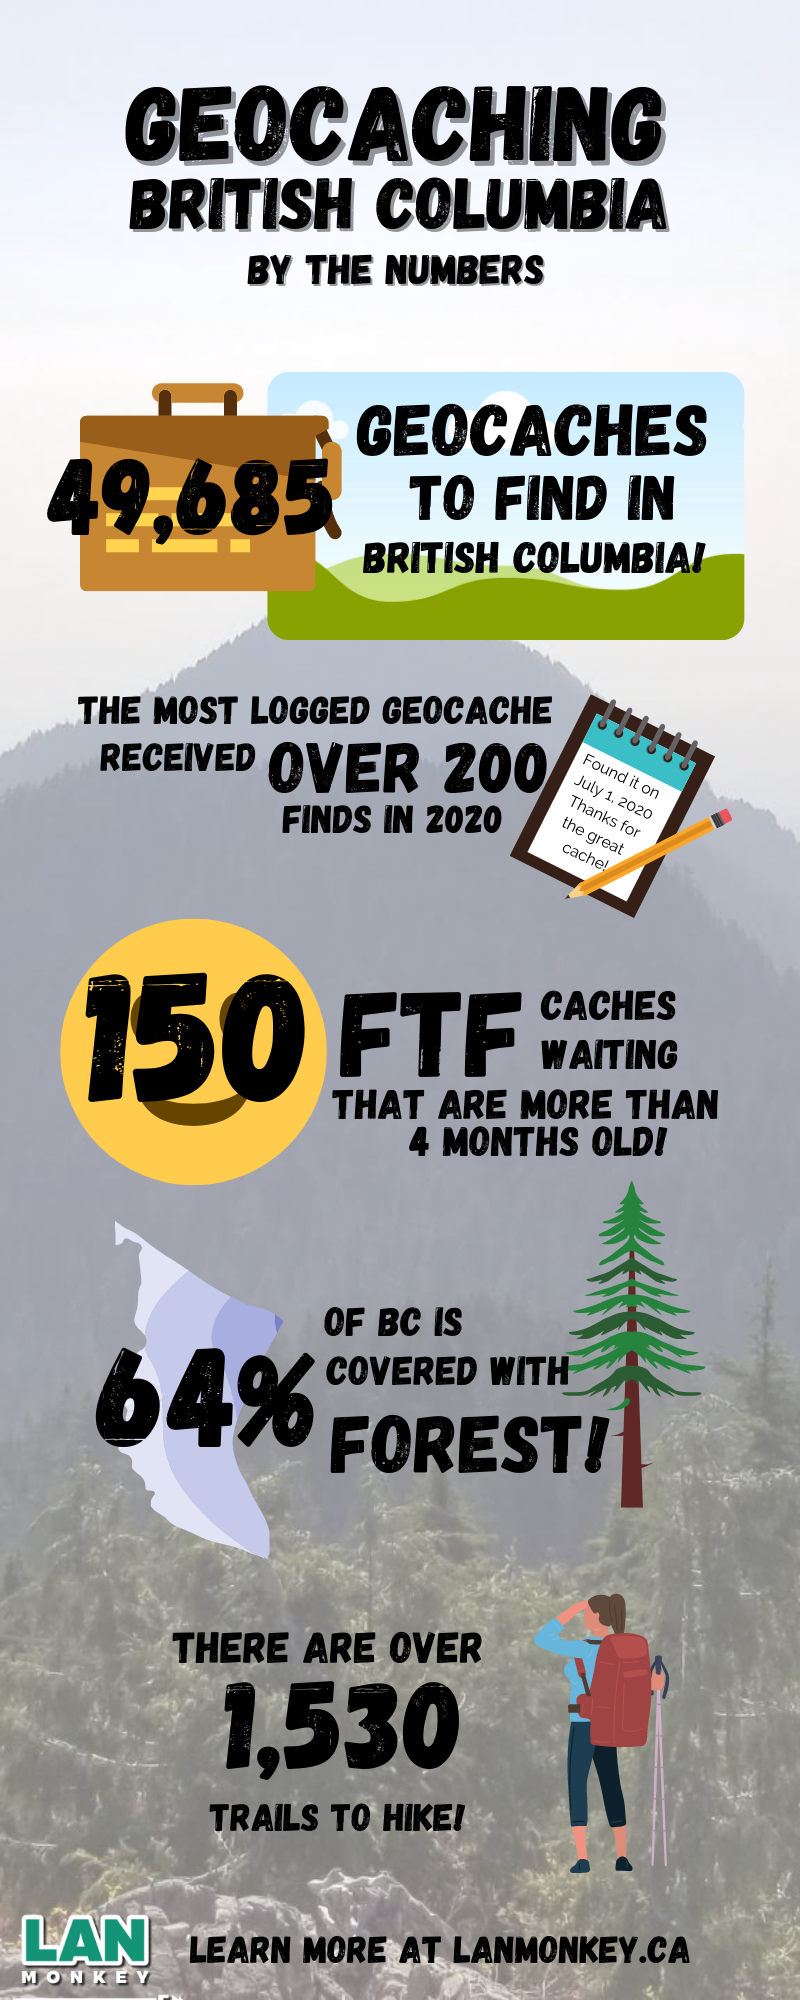 Geocaching in BC by the numbers!